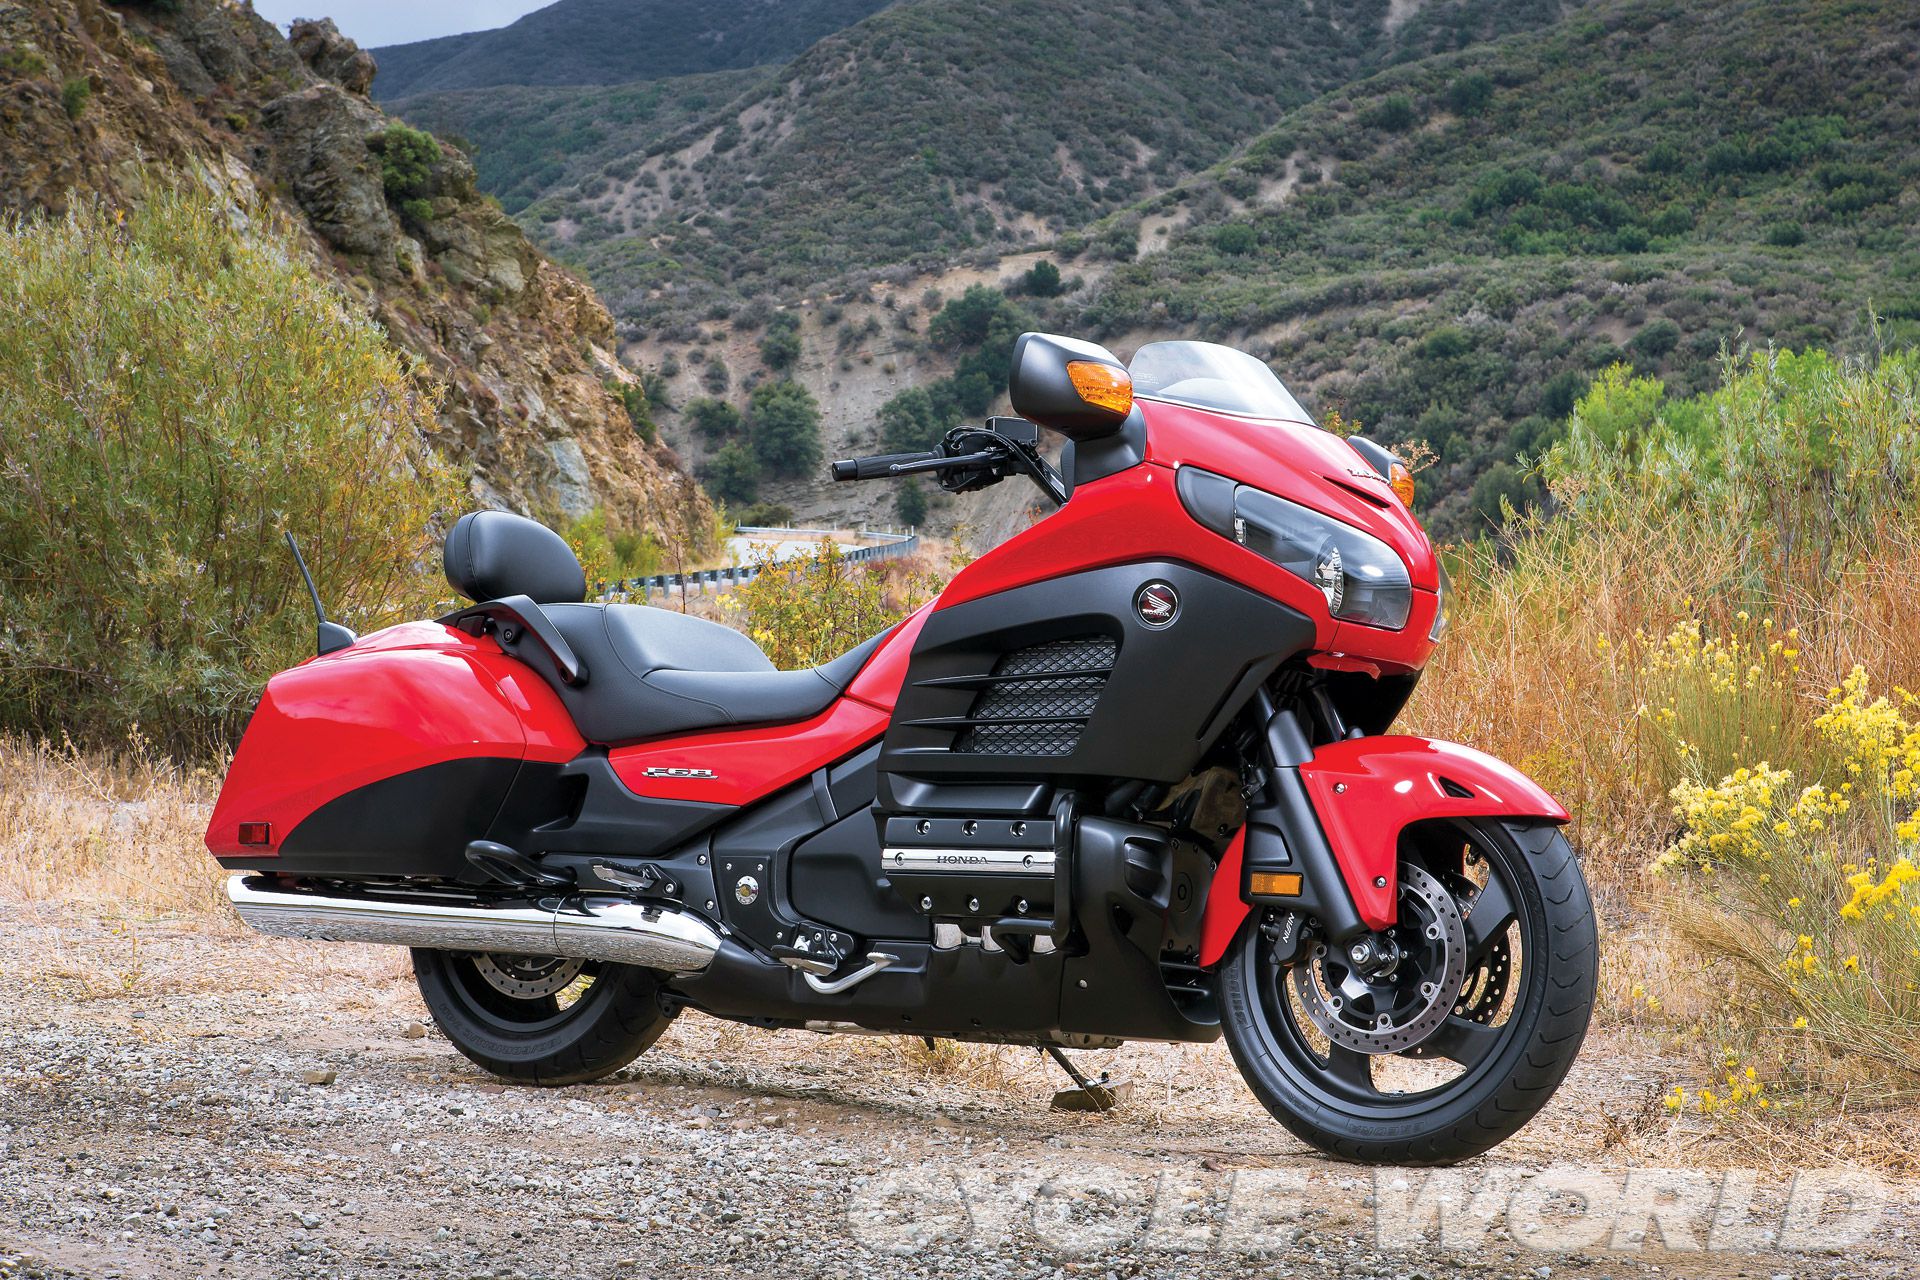 2013 Honda Gold Wing F6B First Look Review | Cycle World